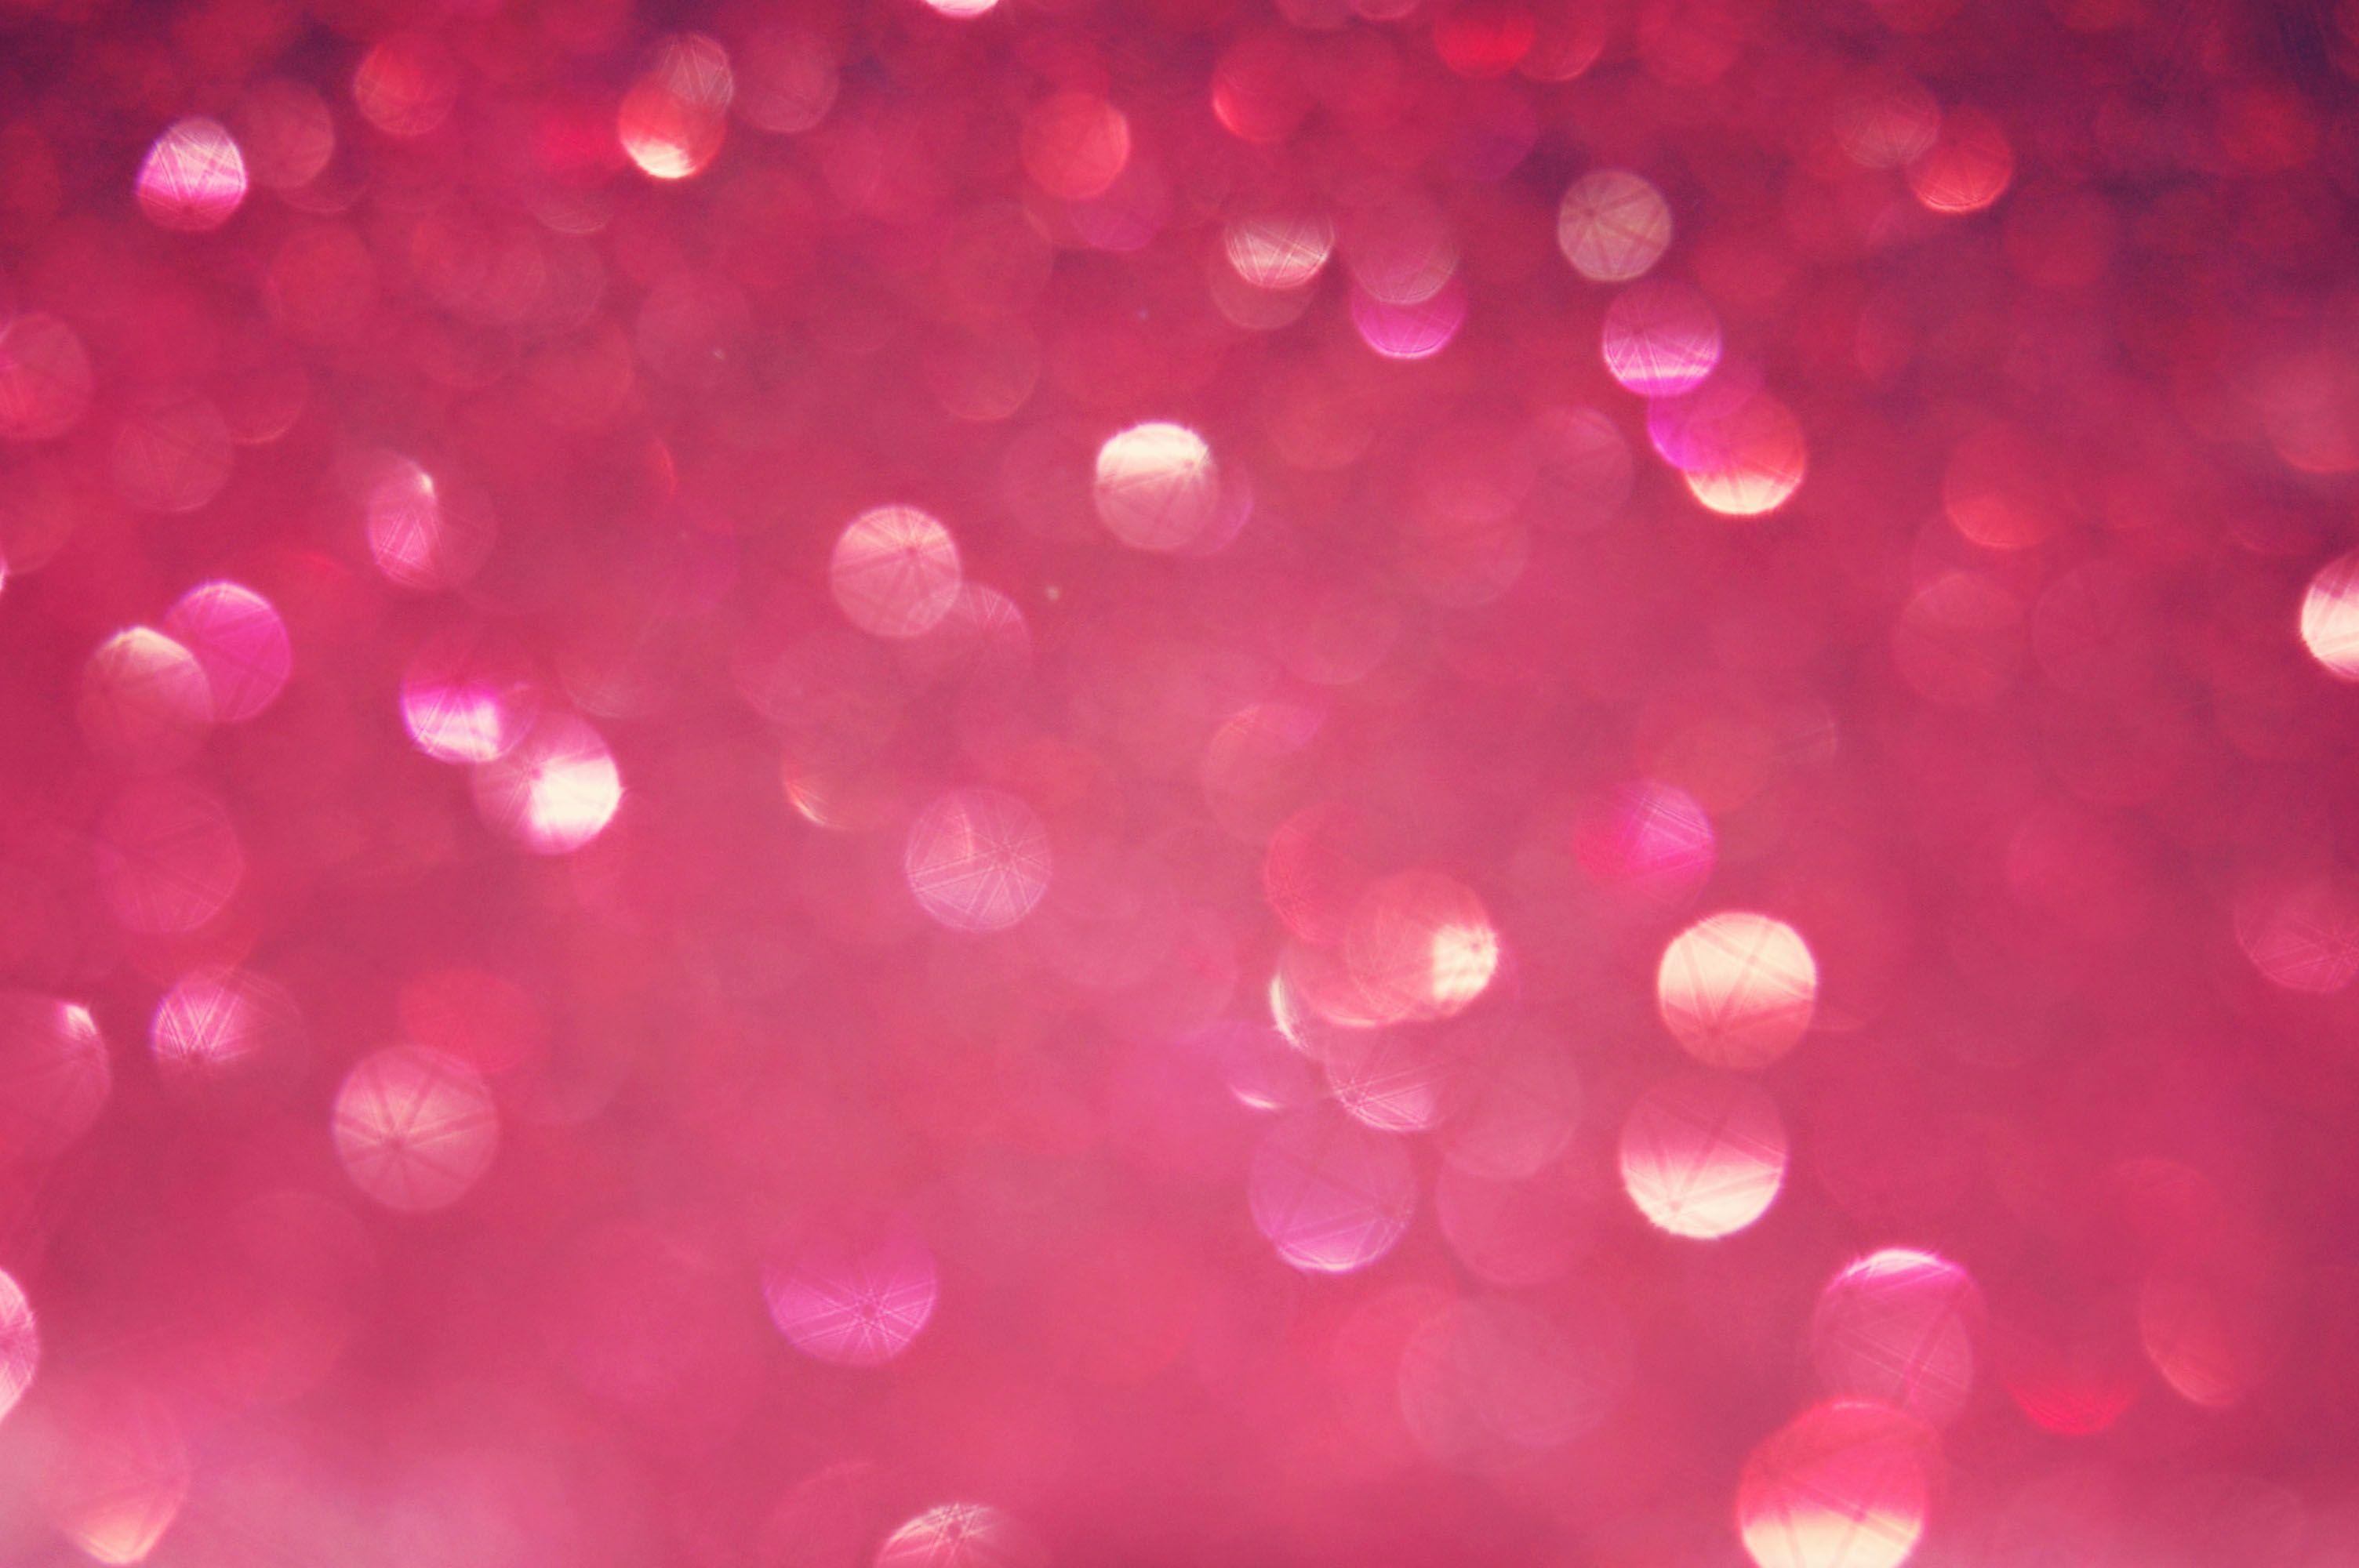 Wallpaper For > Pink And Blue Glitter Wallpaper